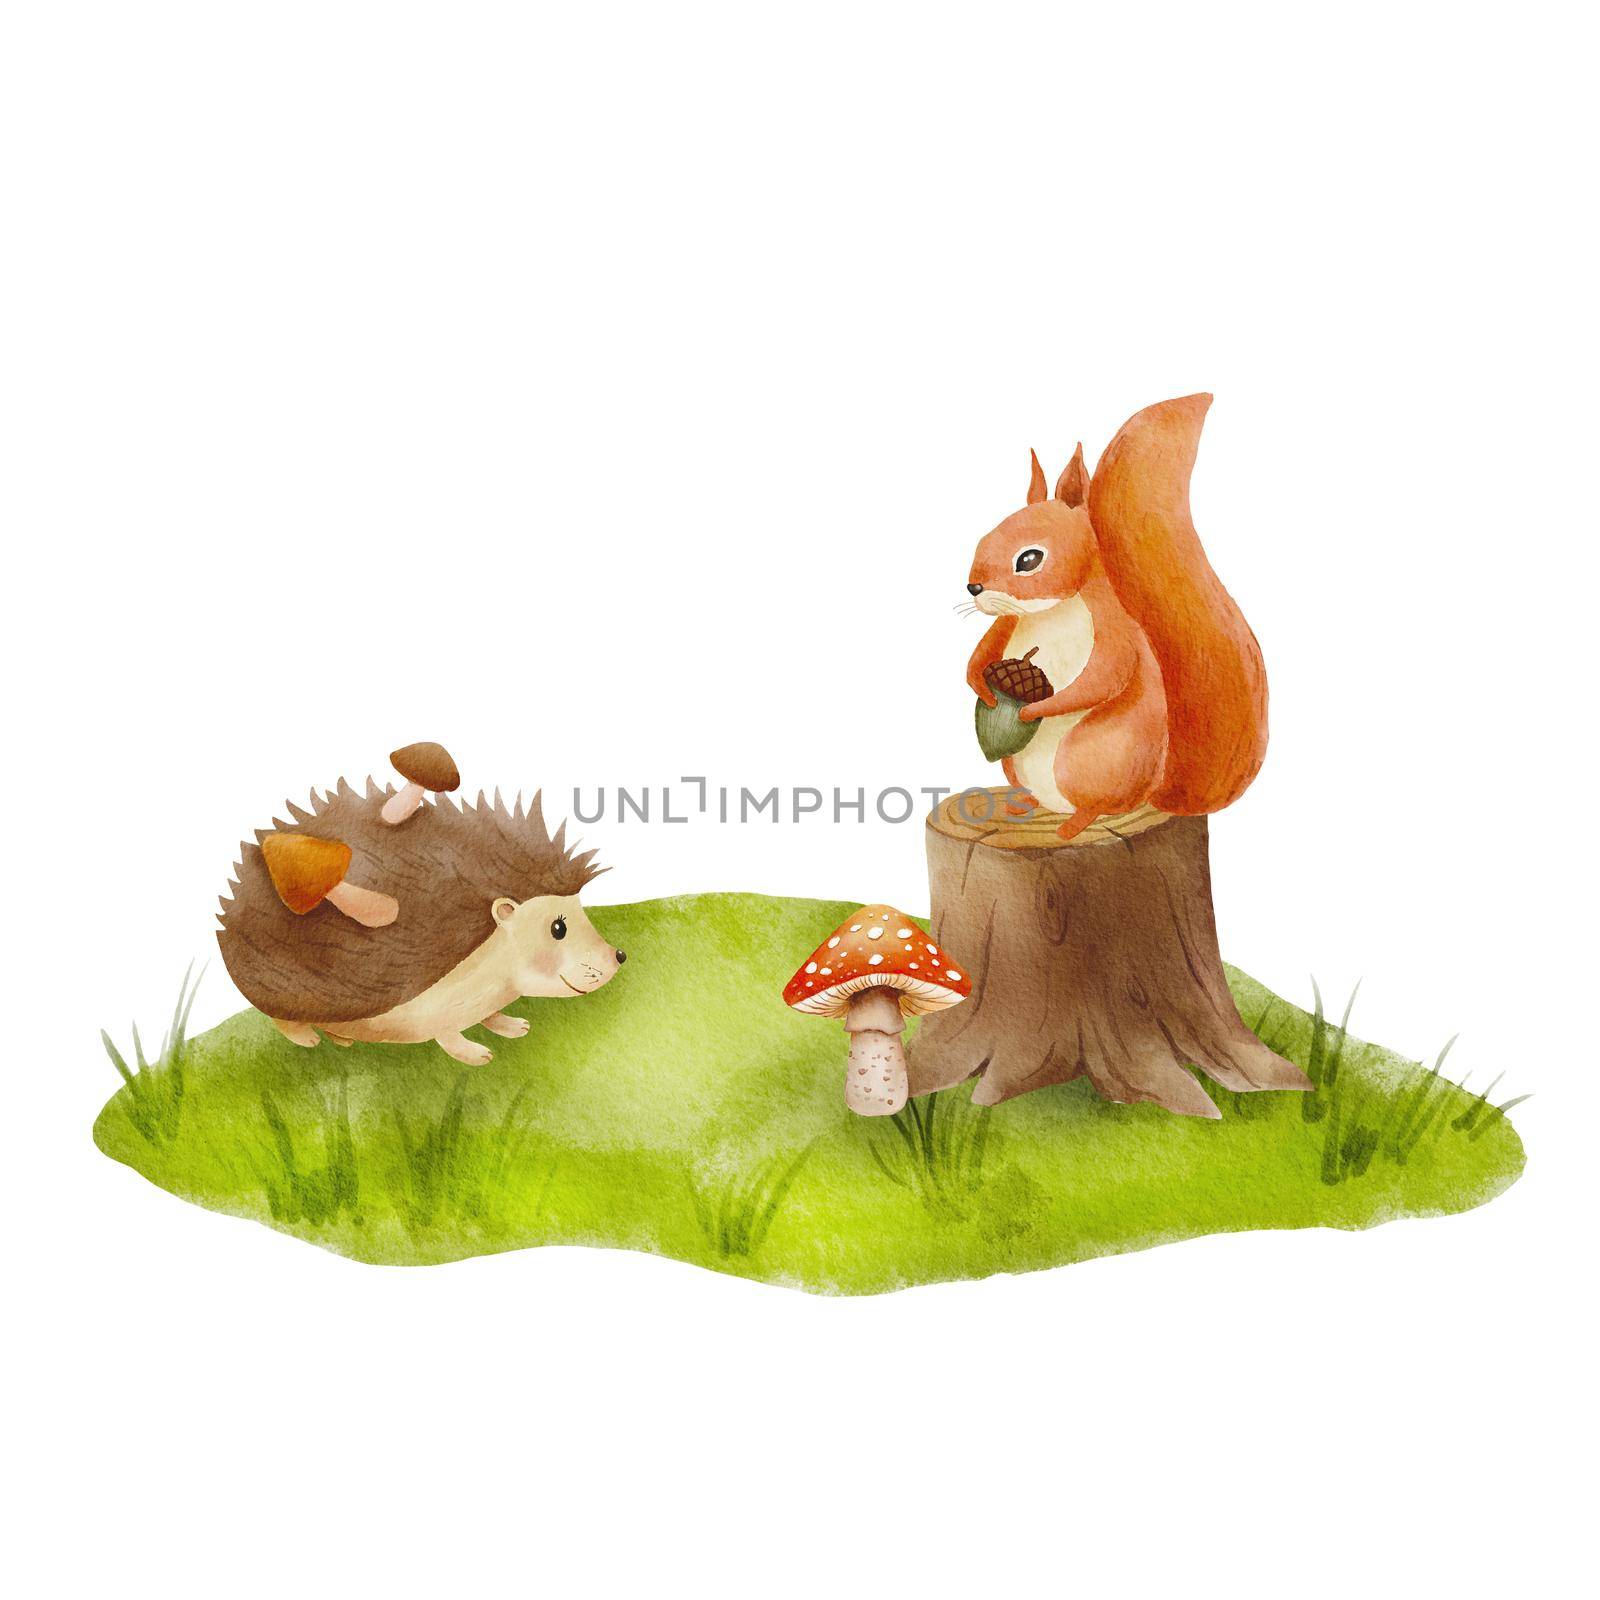 Watercolor hand drawn composition with woodland animals. Squirrel and hedgehog with mushrooms on forest clearing and stump. Fall season illustration for kids on white